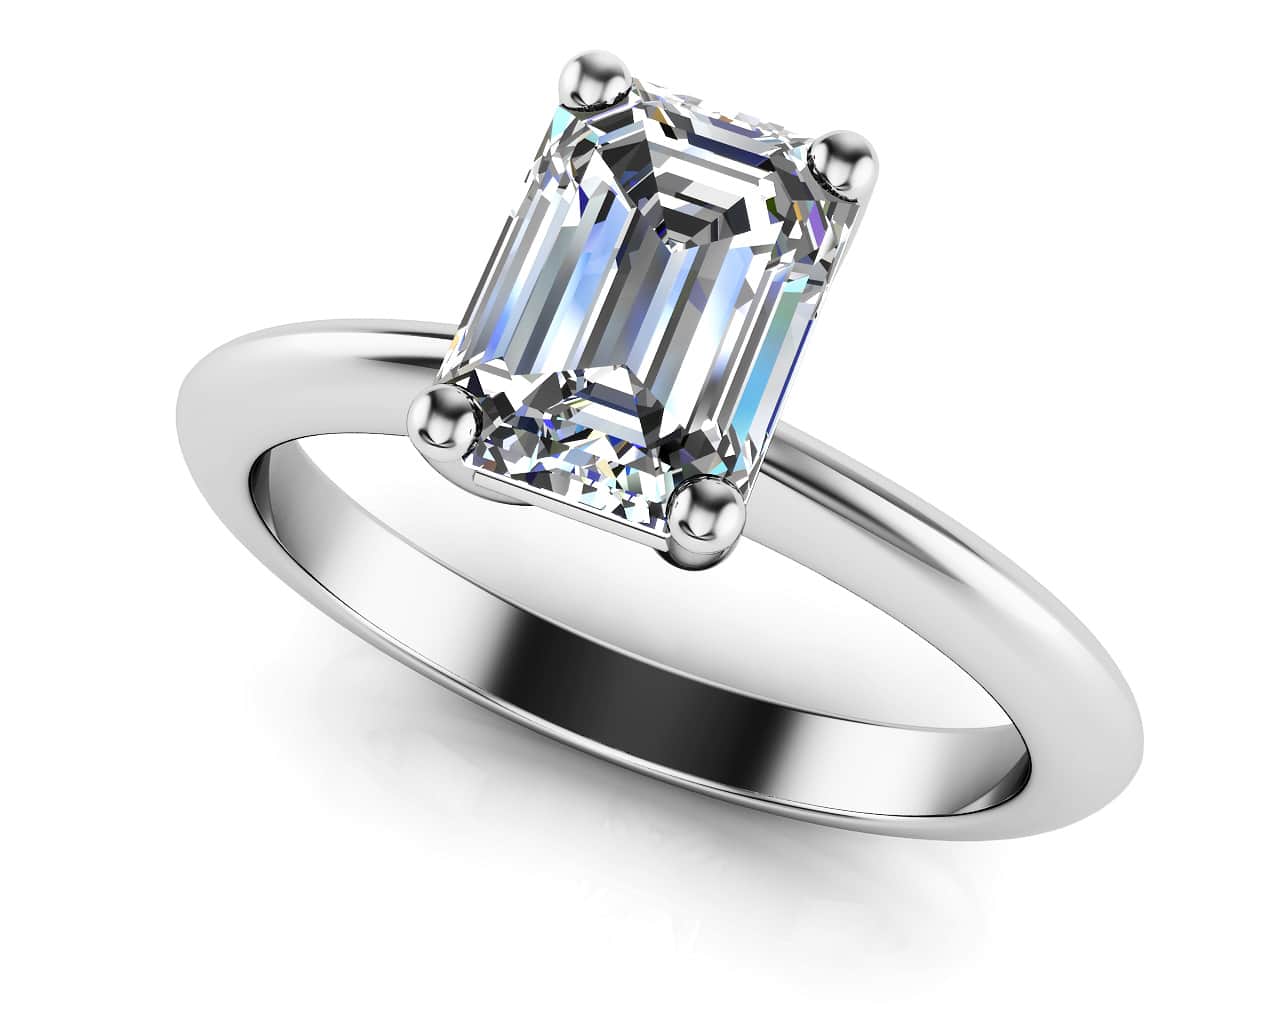 Classic Emerald Cut Diamond Engagement Ring 1/2 Carat Total Weight